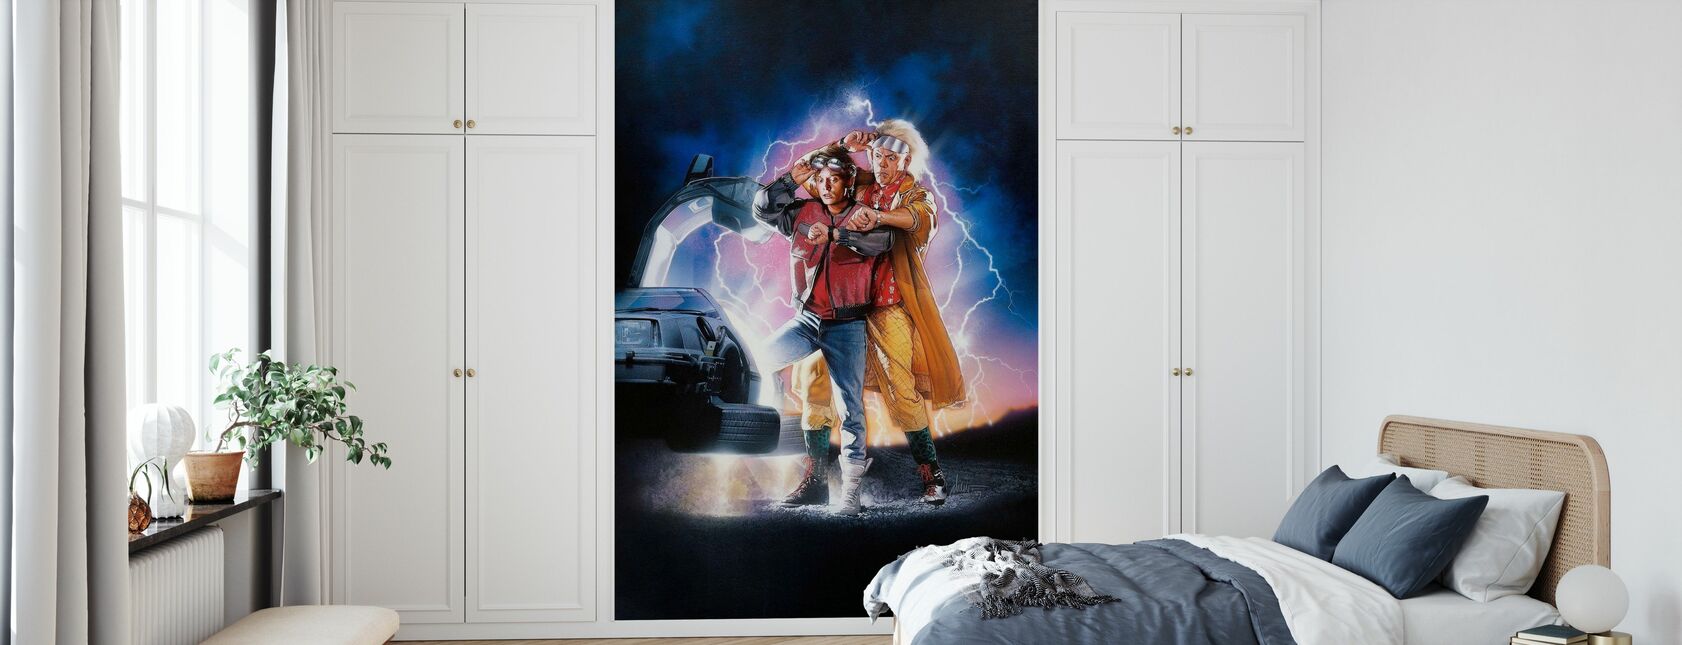 Back to the Future Part II - Wallpaper - Bedroom